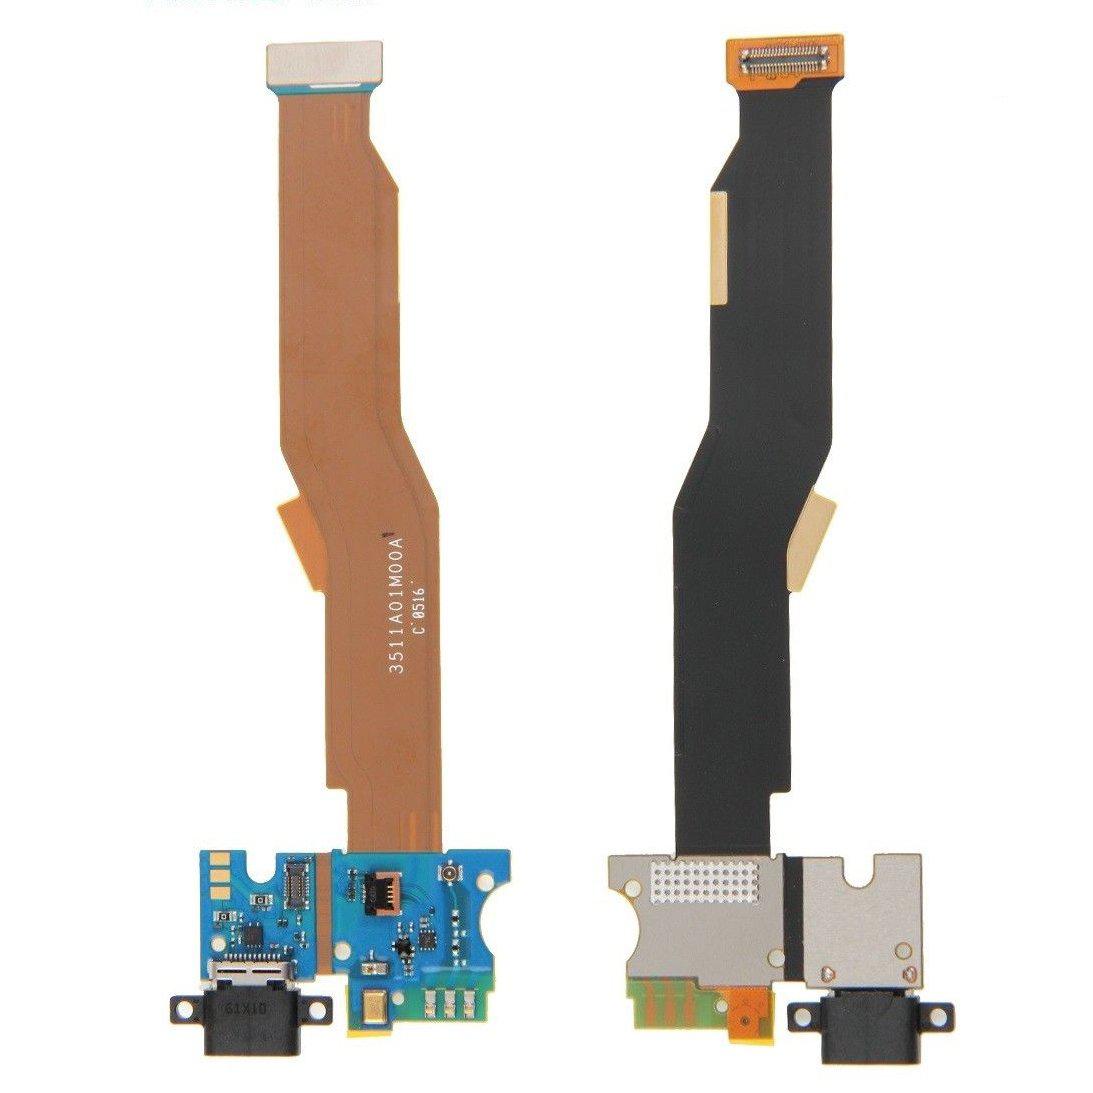 Xiaomi Mi 5 Type-C Charging Port Flex Cable for [product_price] - First Help Tech